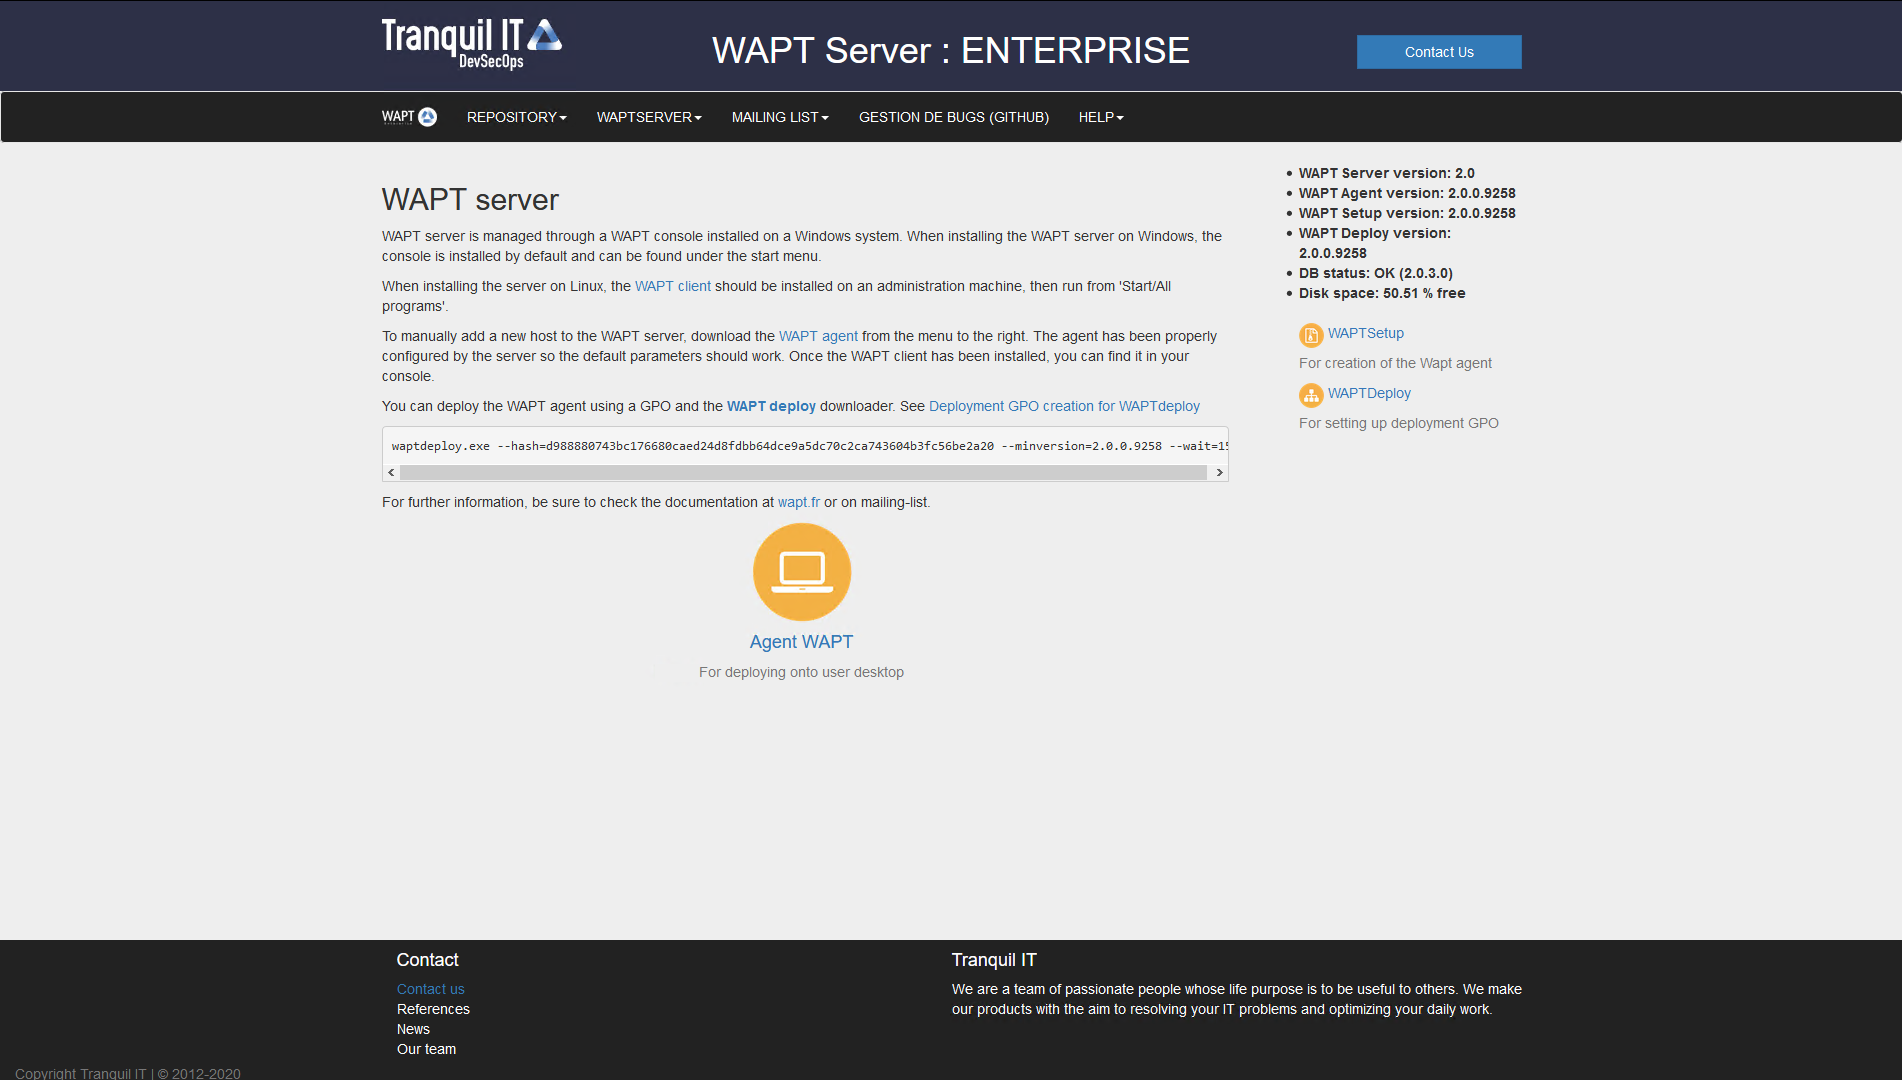 The WAPT Server on your Windows is ready